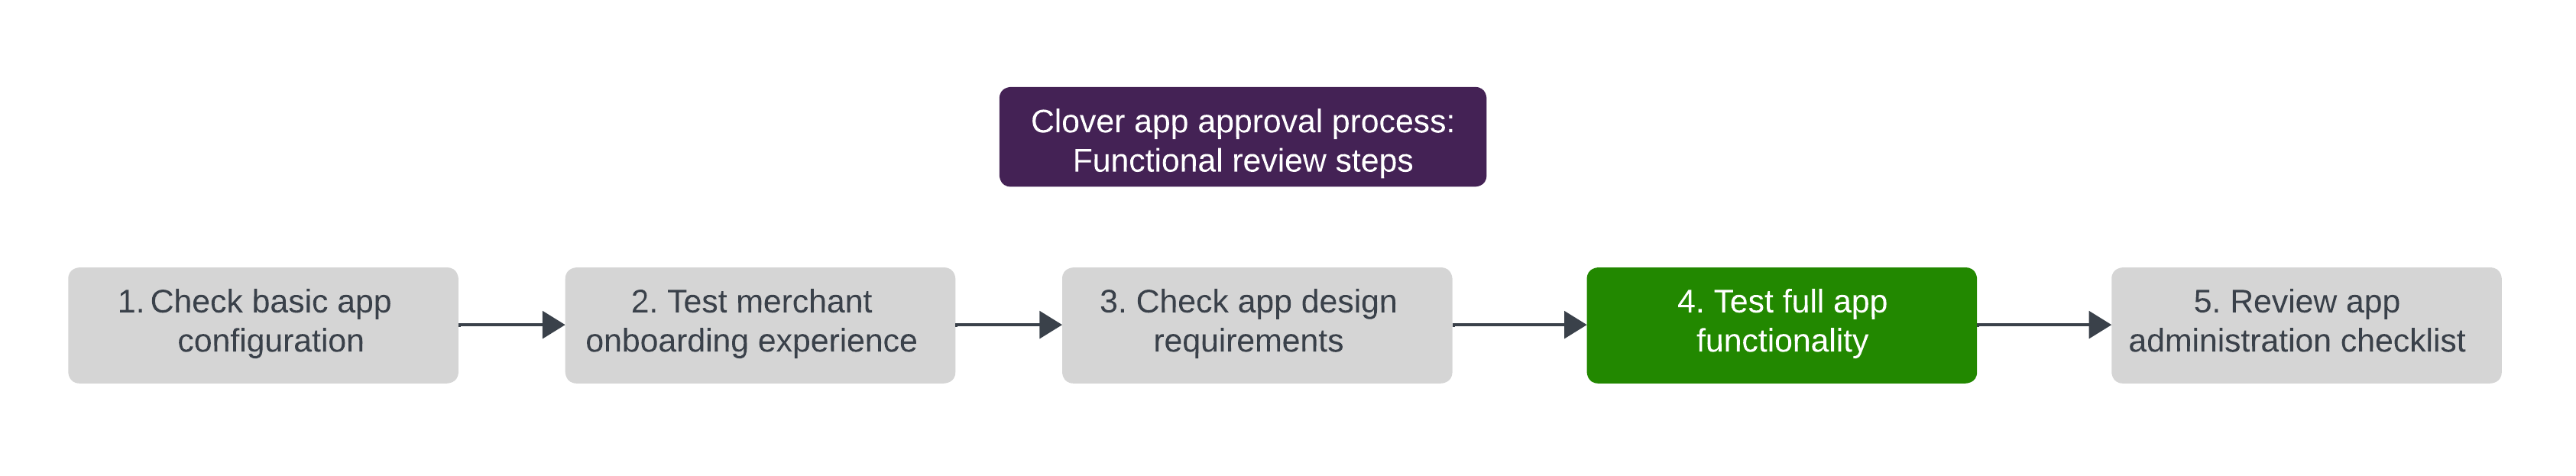 Functional review: Full app functionality